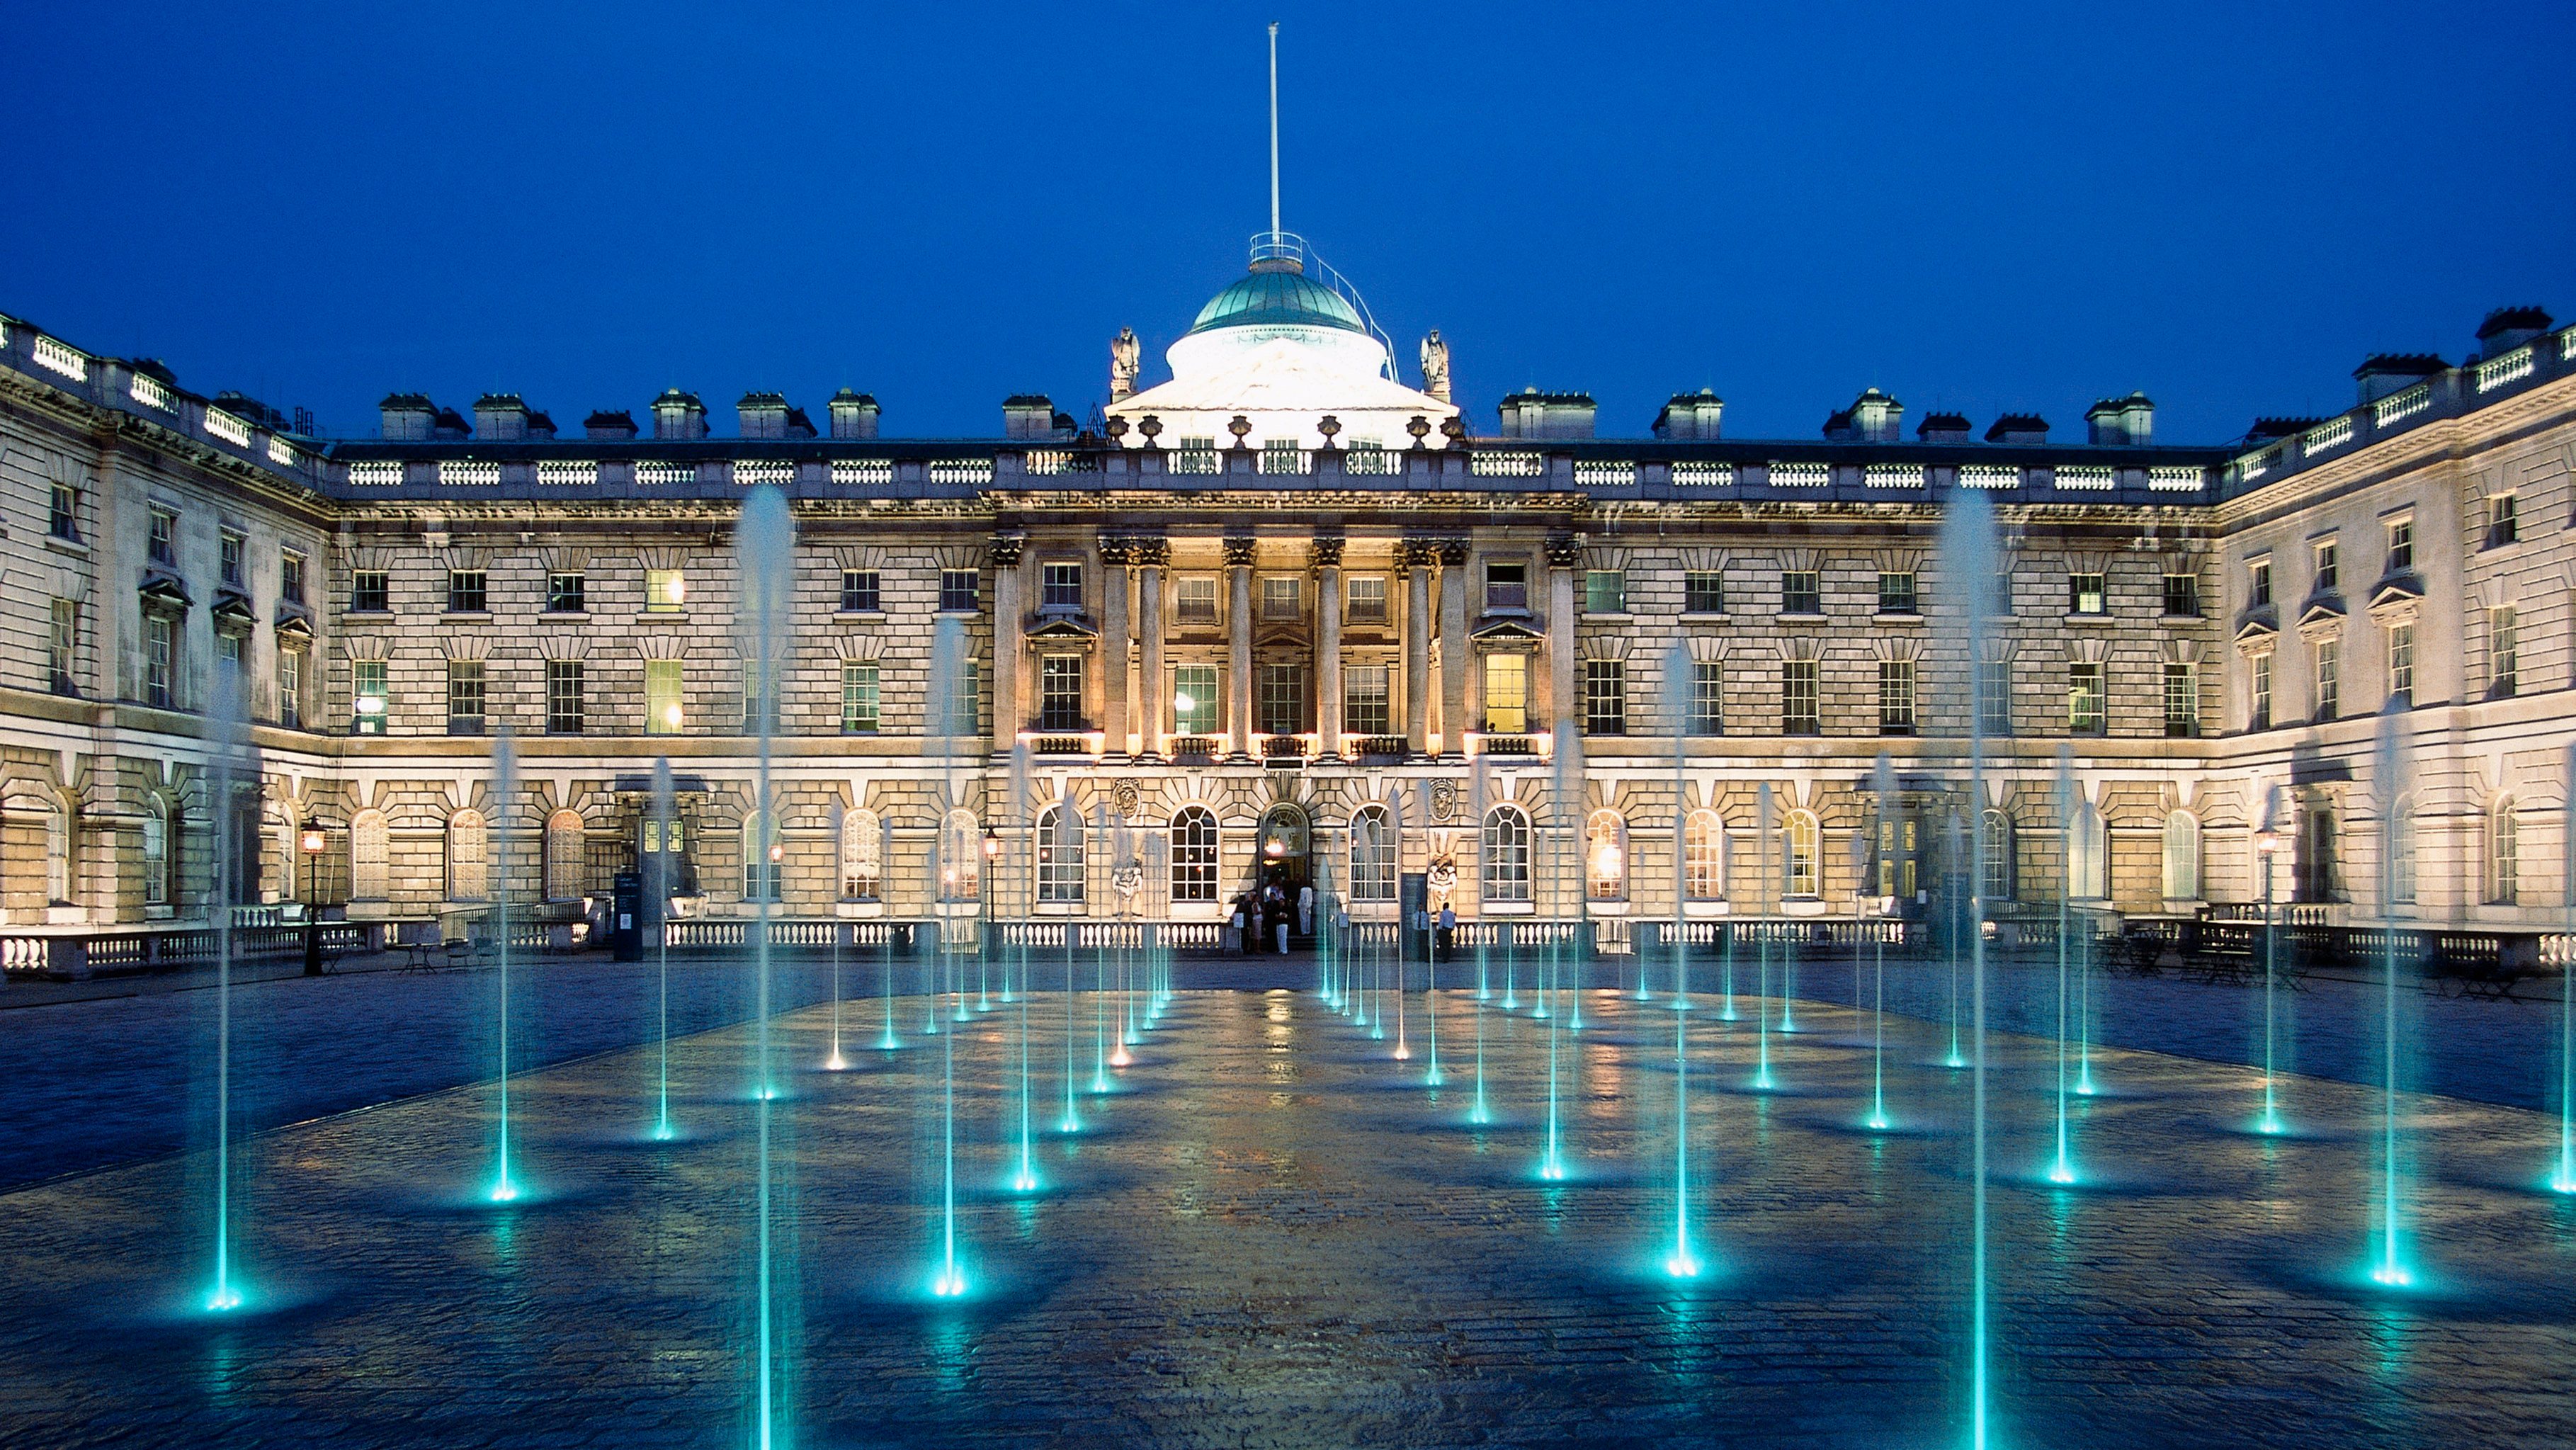 View of Somerset House at night, London, United Kingdom.